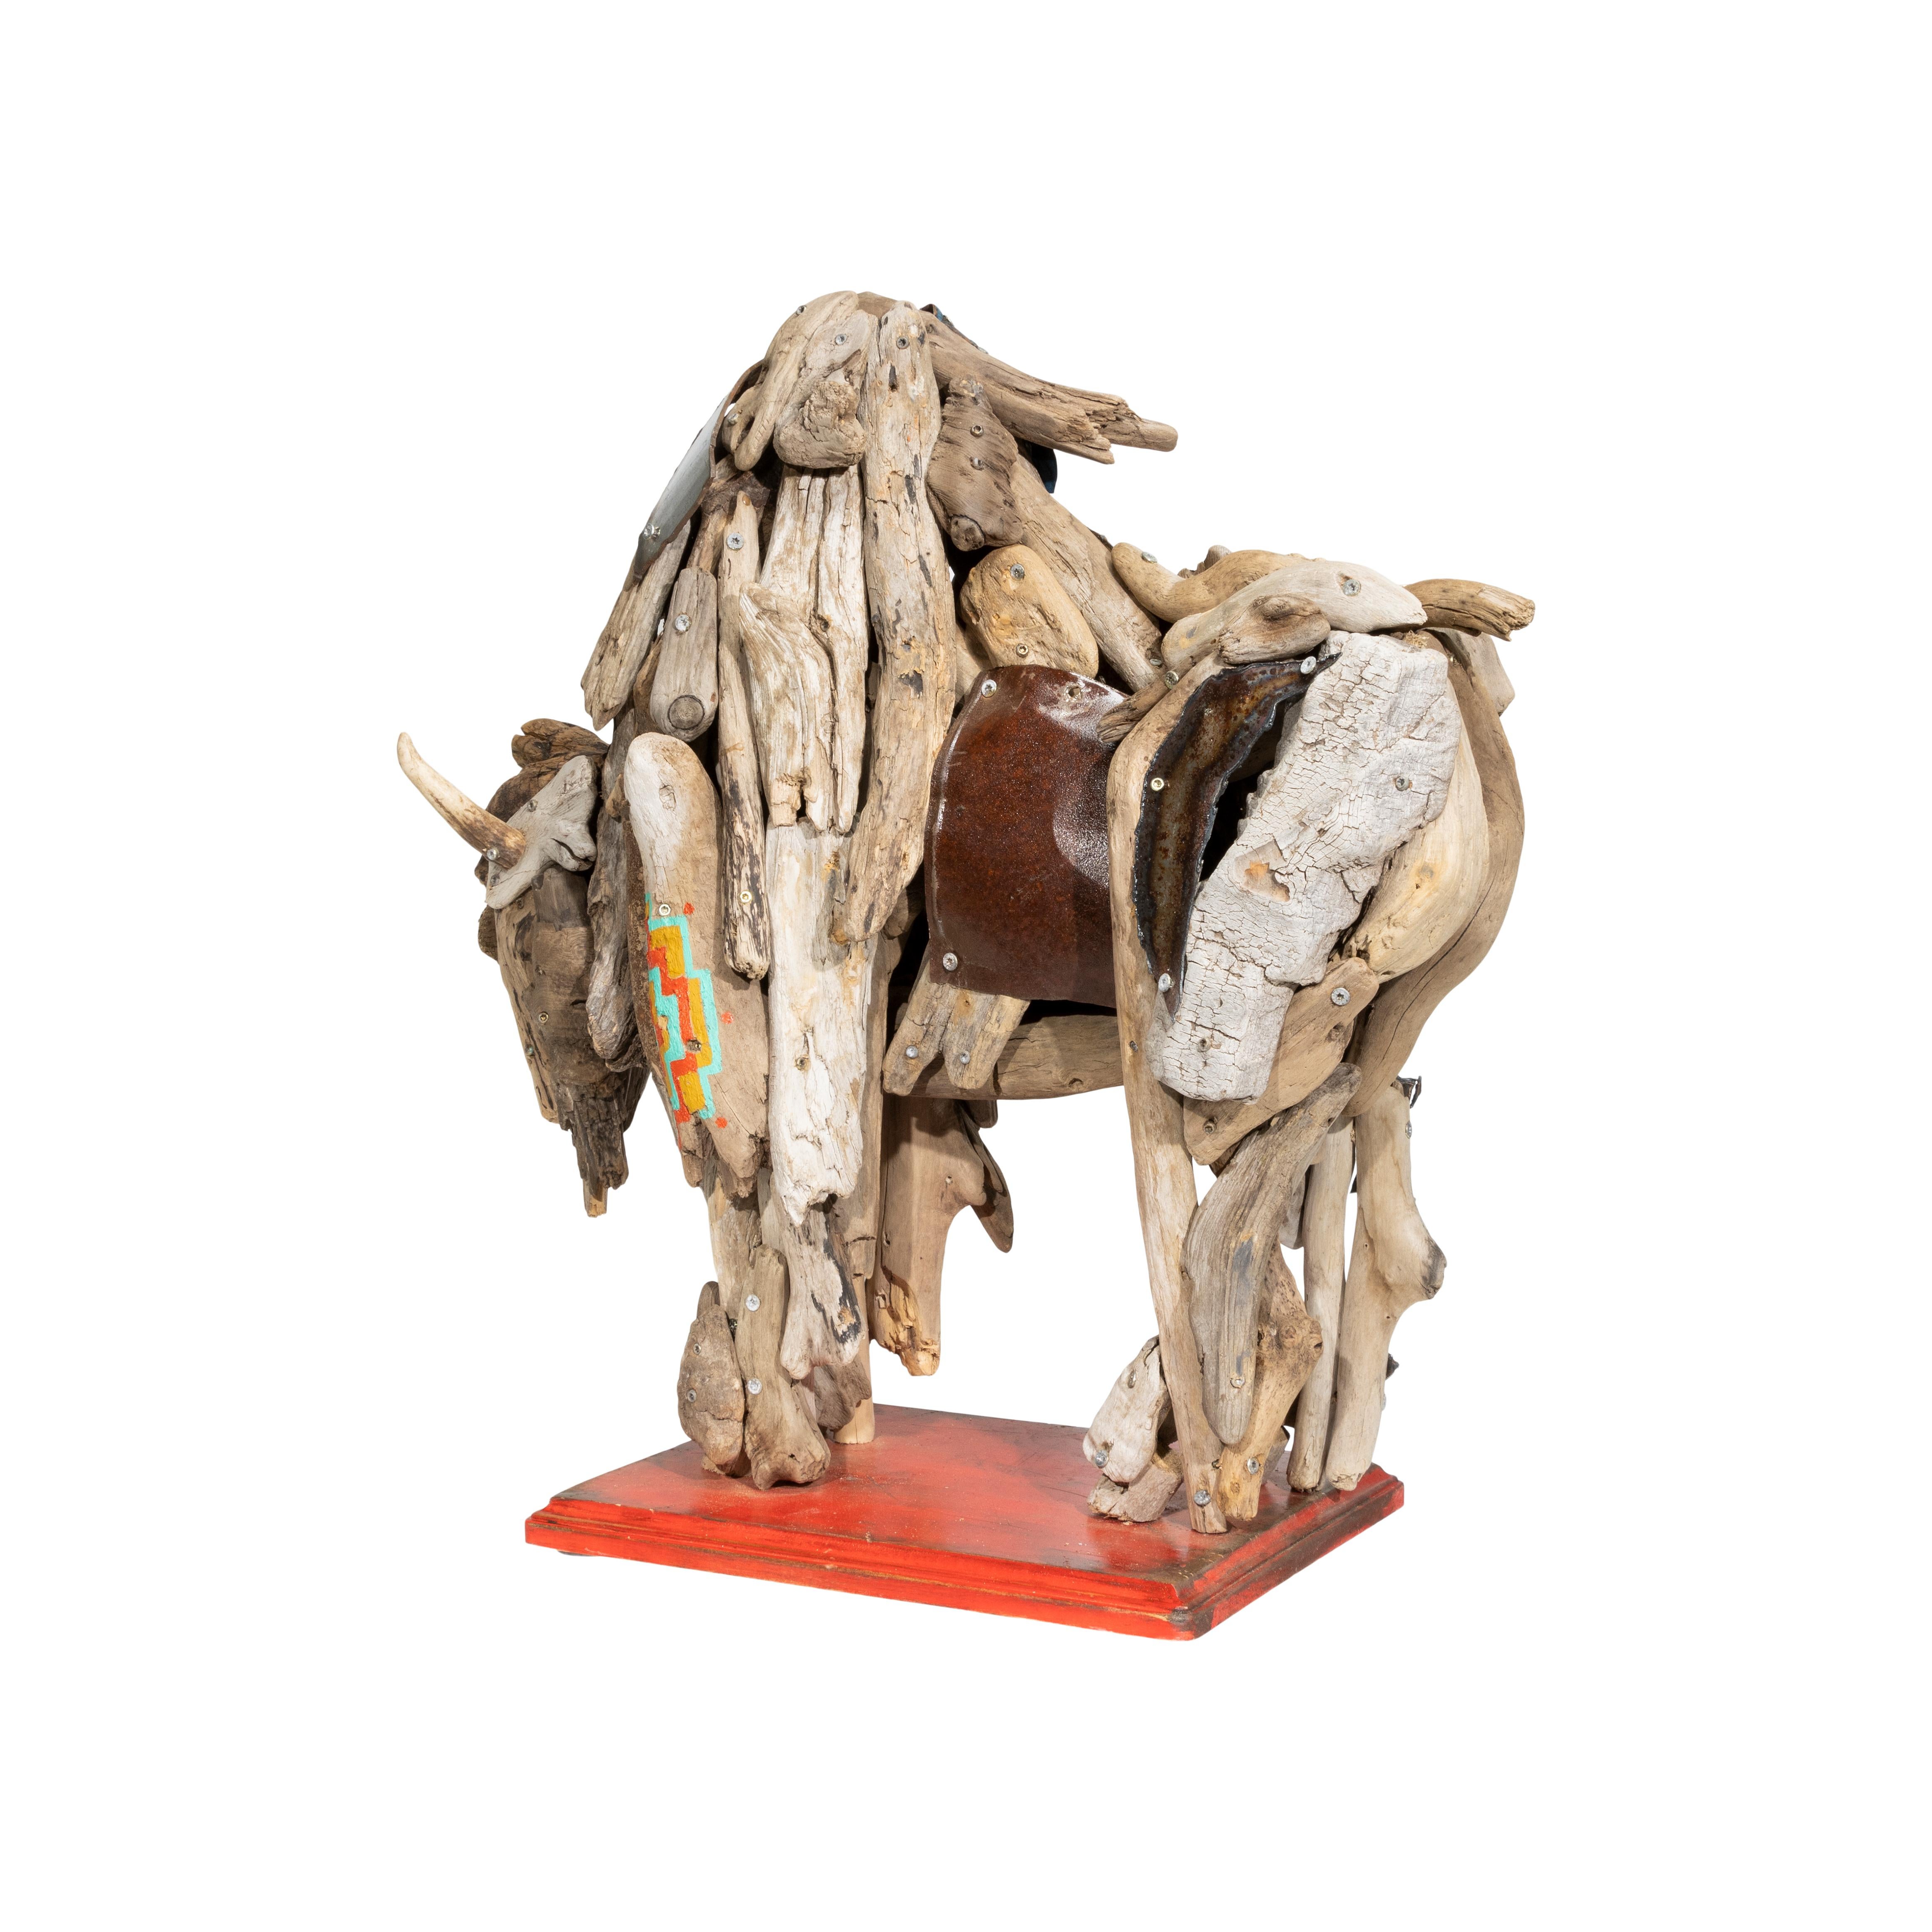 Large driftwood buffalo. Natural ends with scrap yard steel by a Montana artist. 21” x 20” x 9”

Period: Contemporary
Origin: Montana, United States
Size: 21” x 20” x 9”

Tina grew up in the beauty of Colorado, the breath-taking rugged